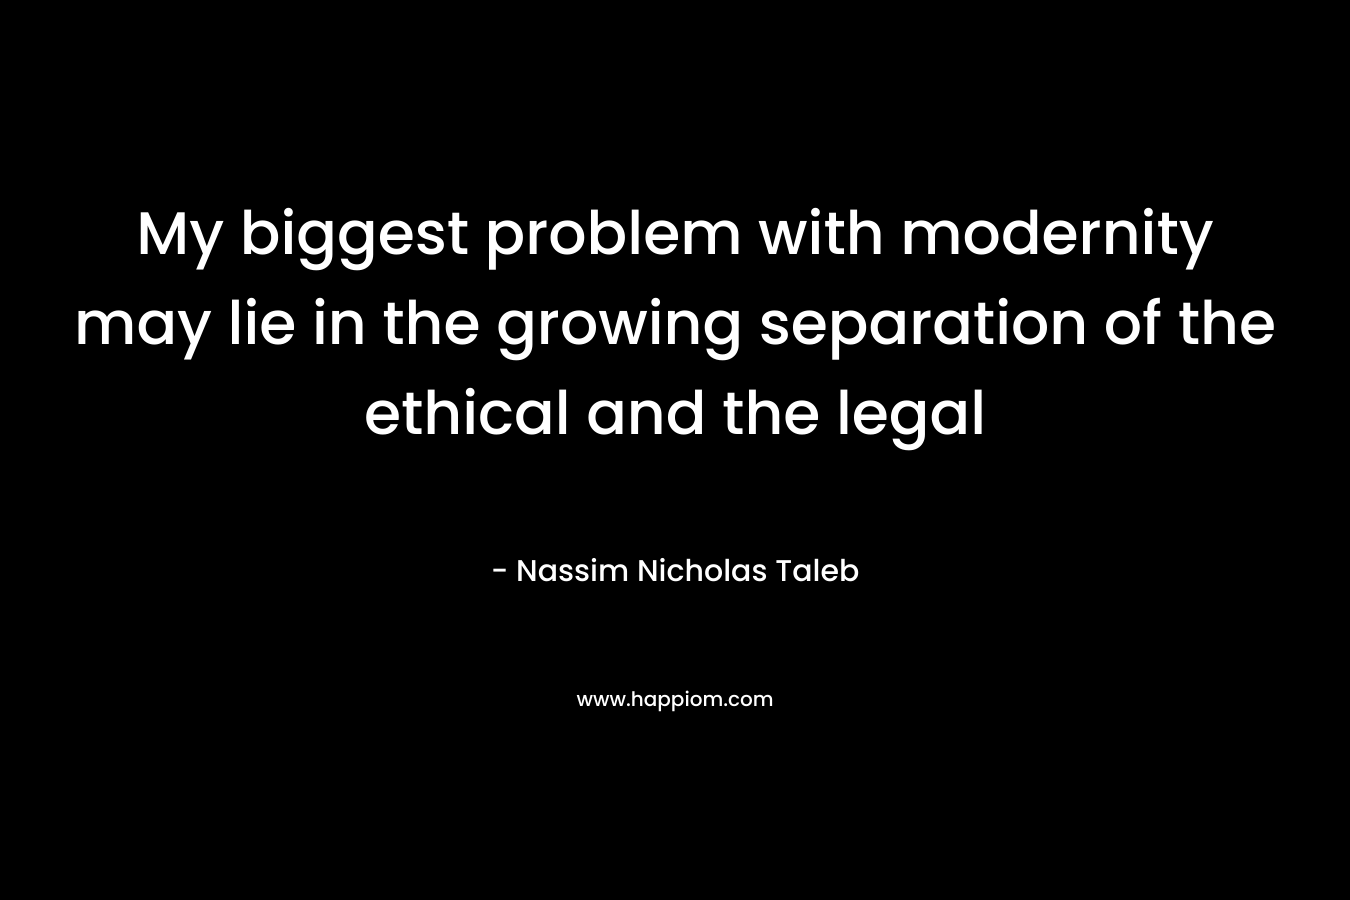 My biggest problem with modernity may lie in the growing separation of the ethical and the legal